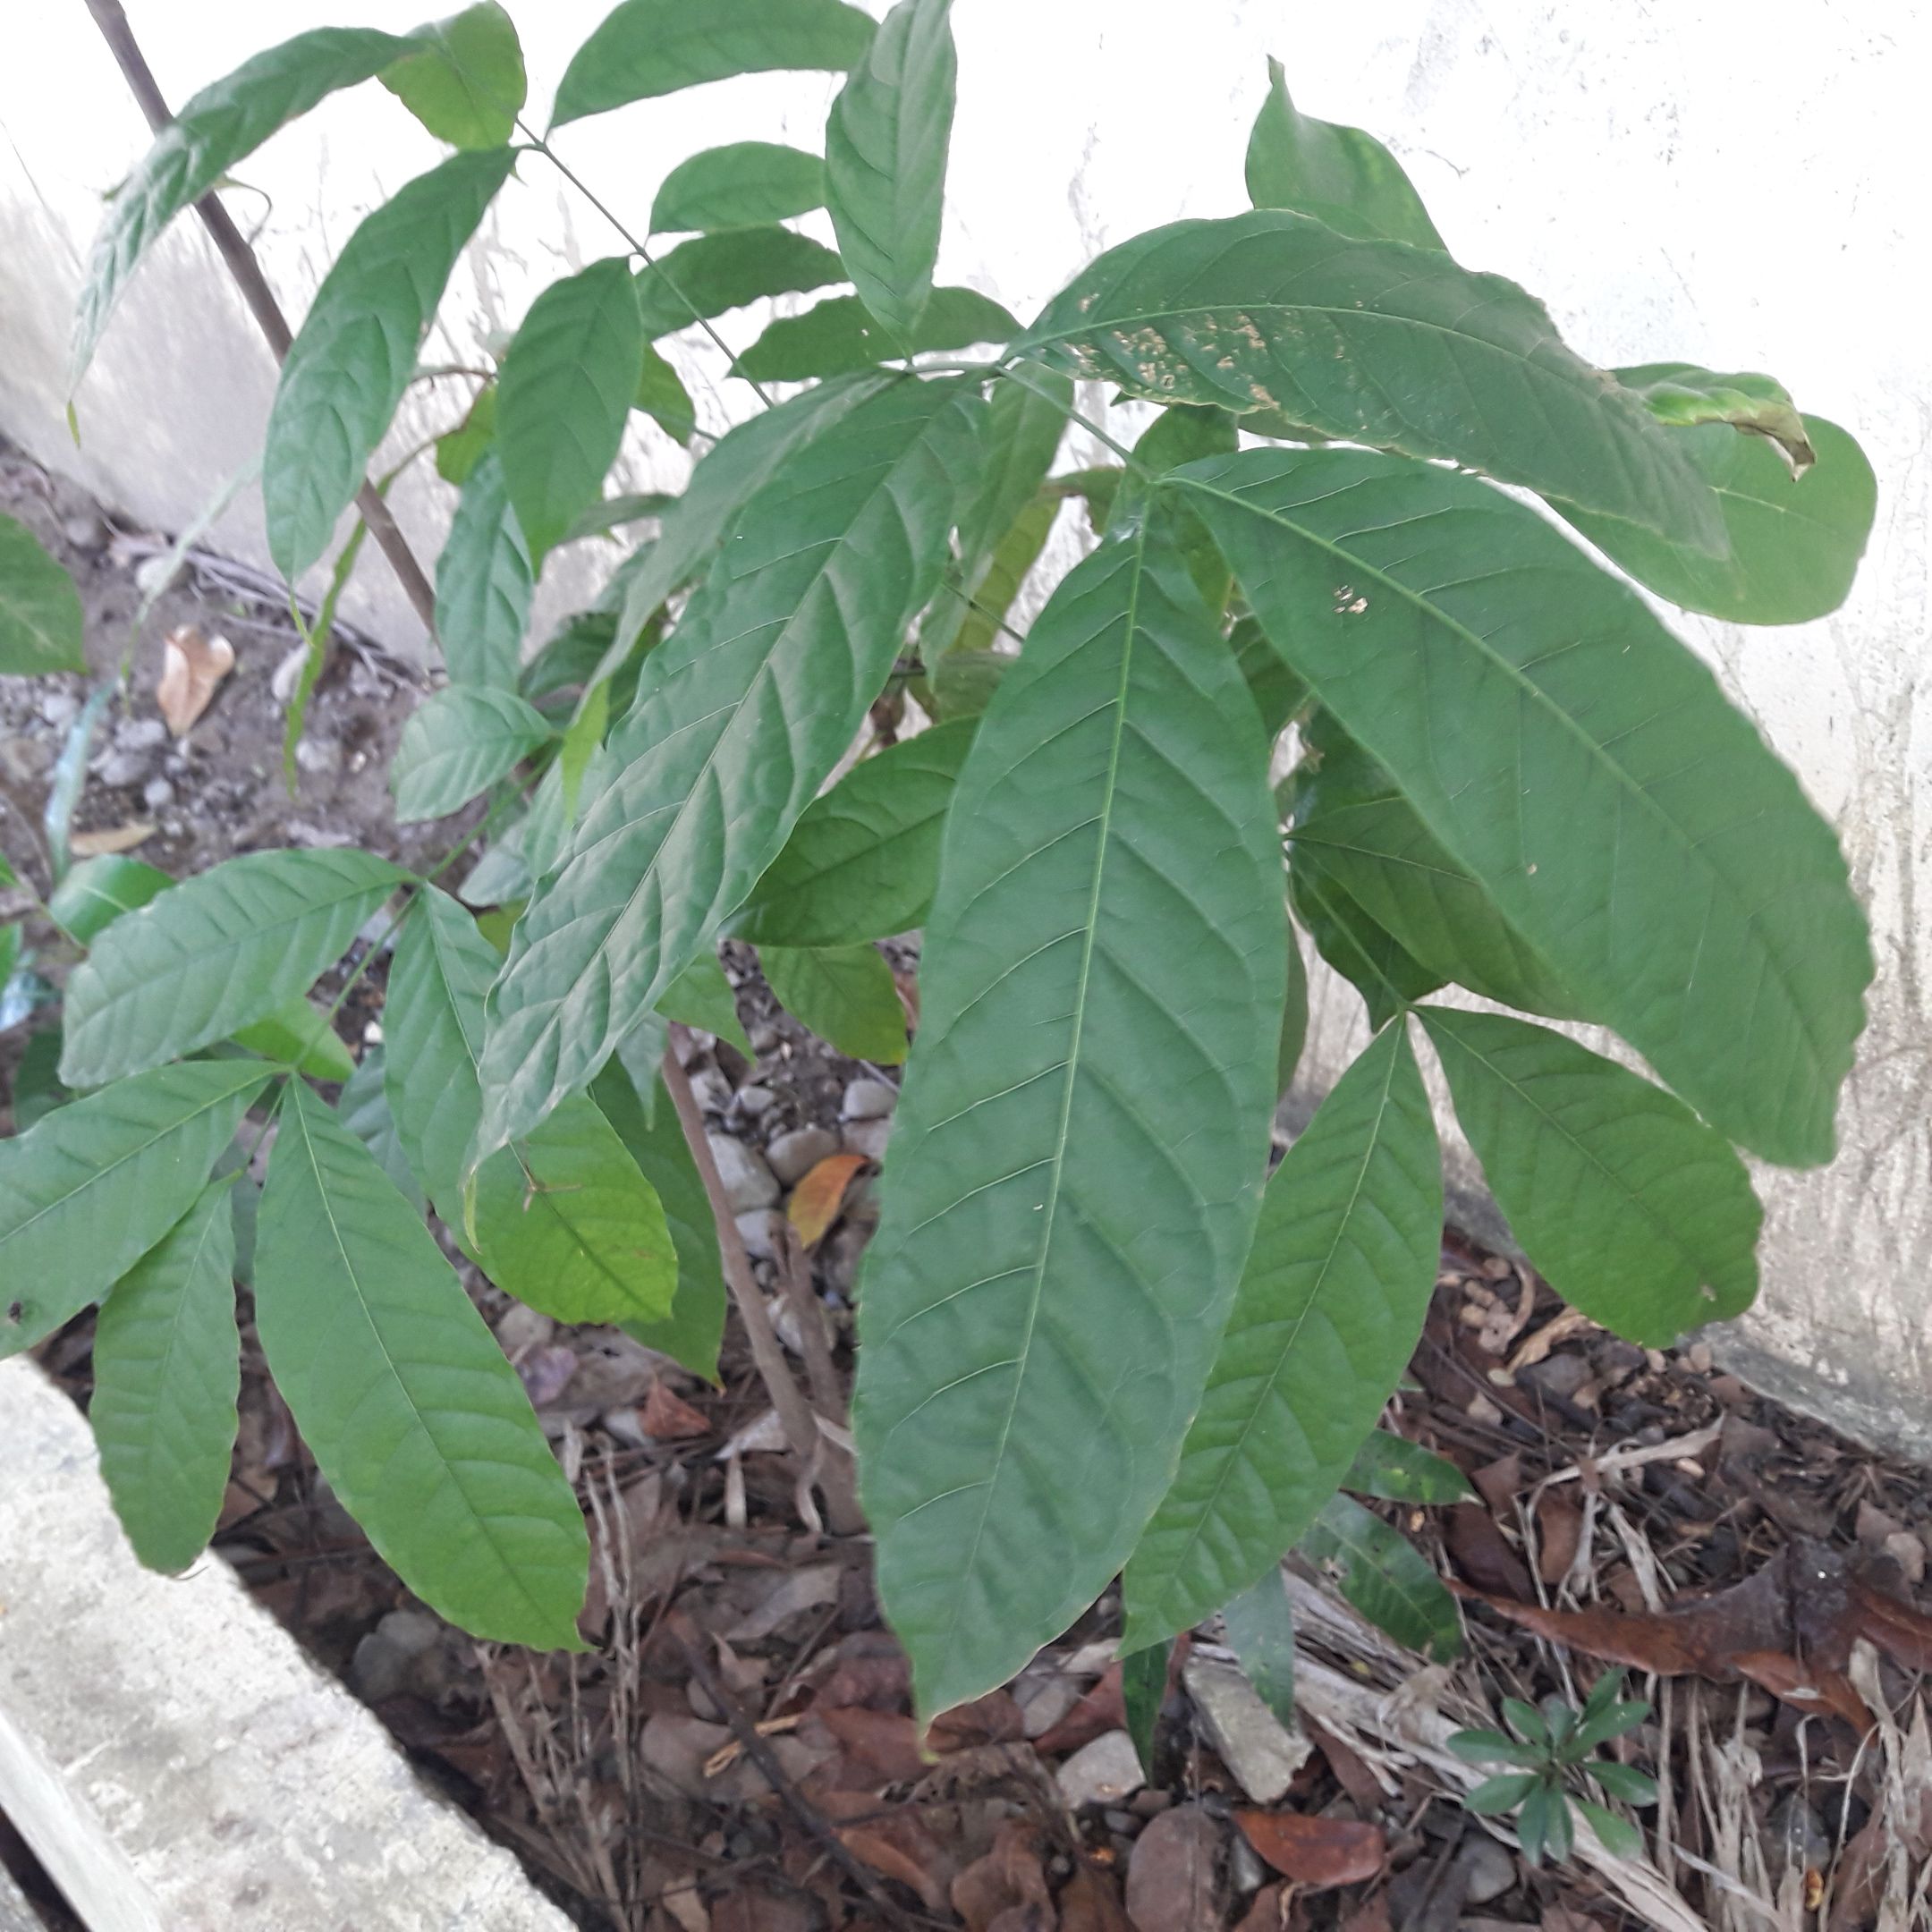 My mahogany plants and trees and planting more — Steemit